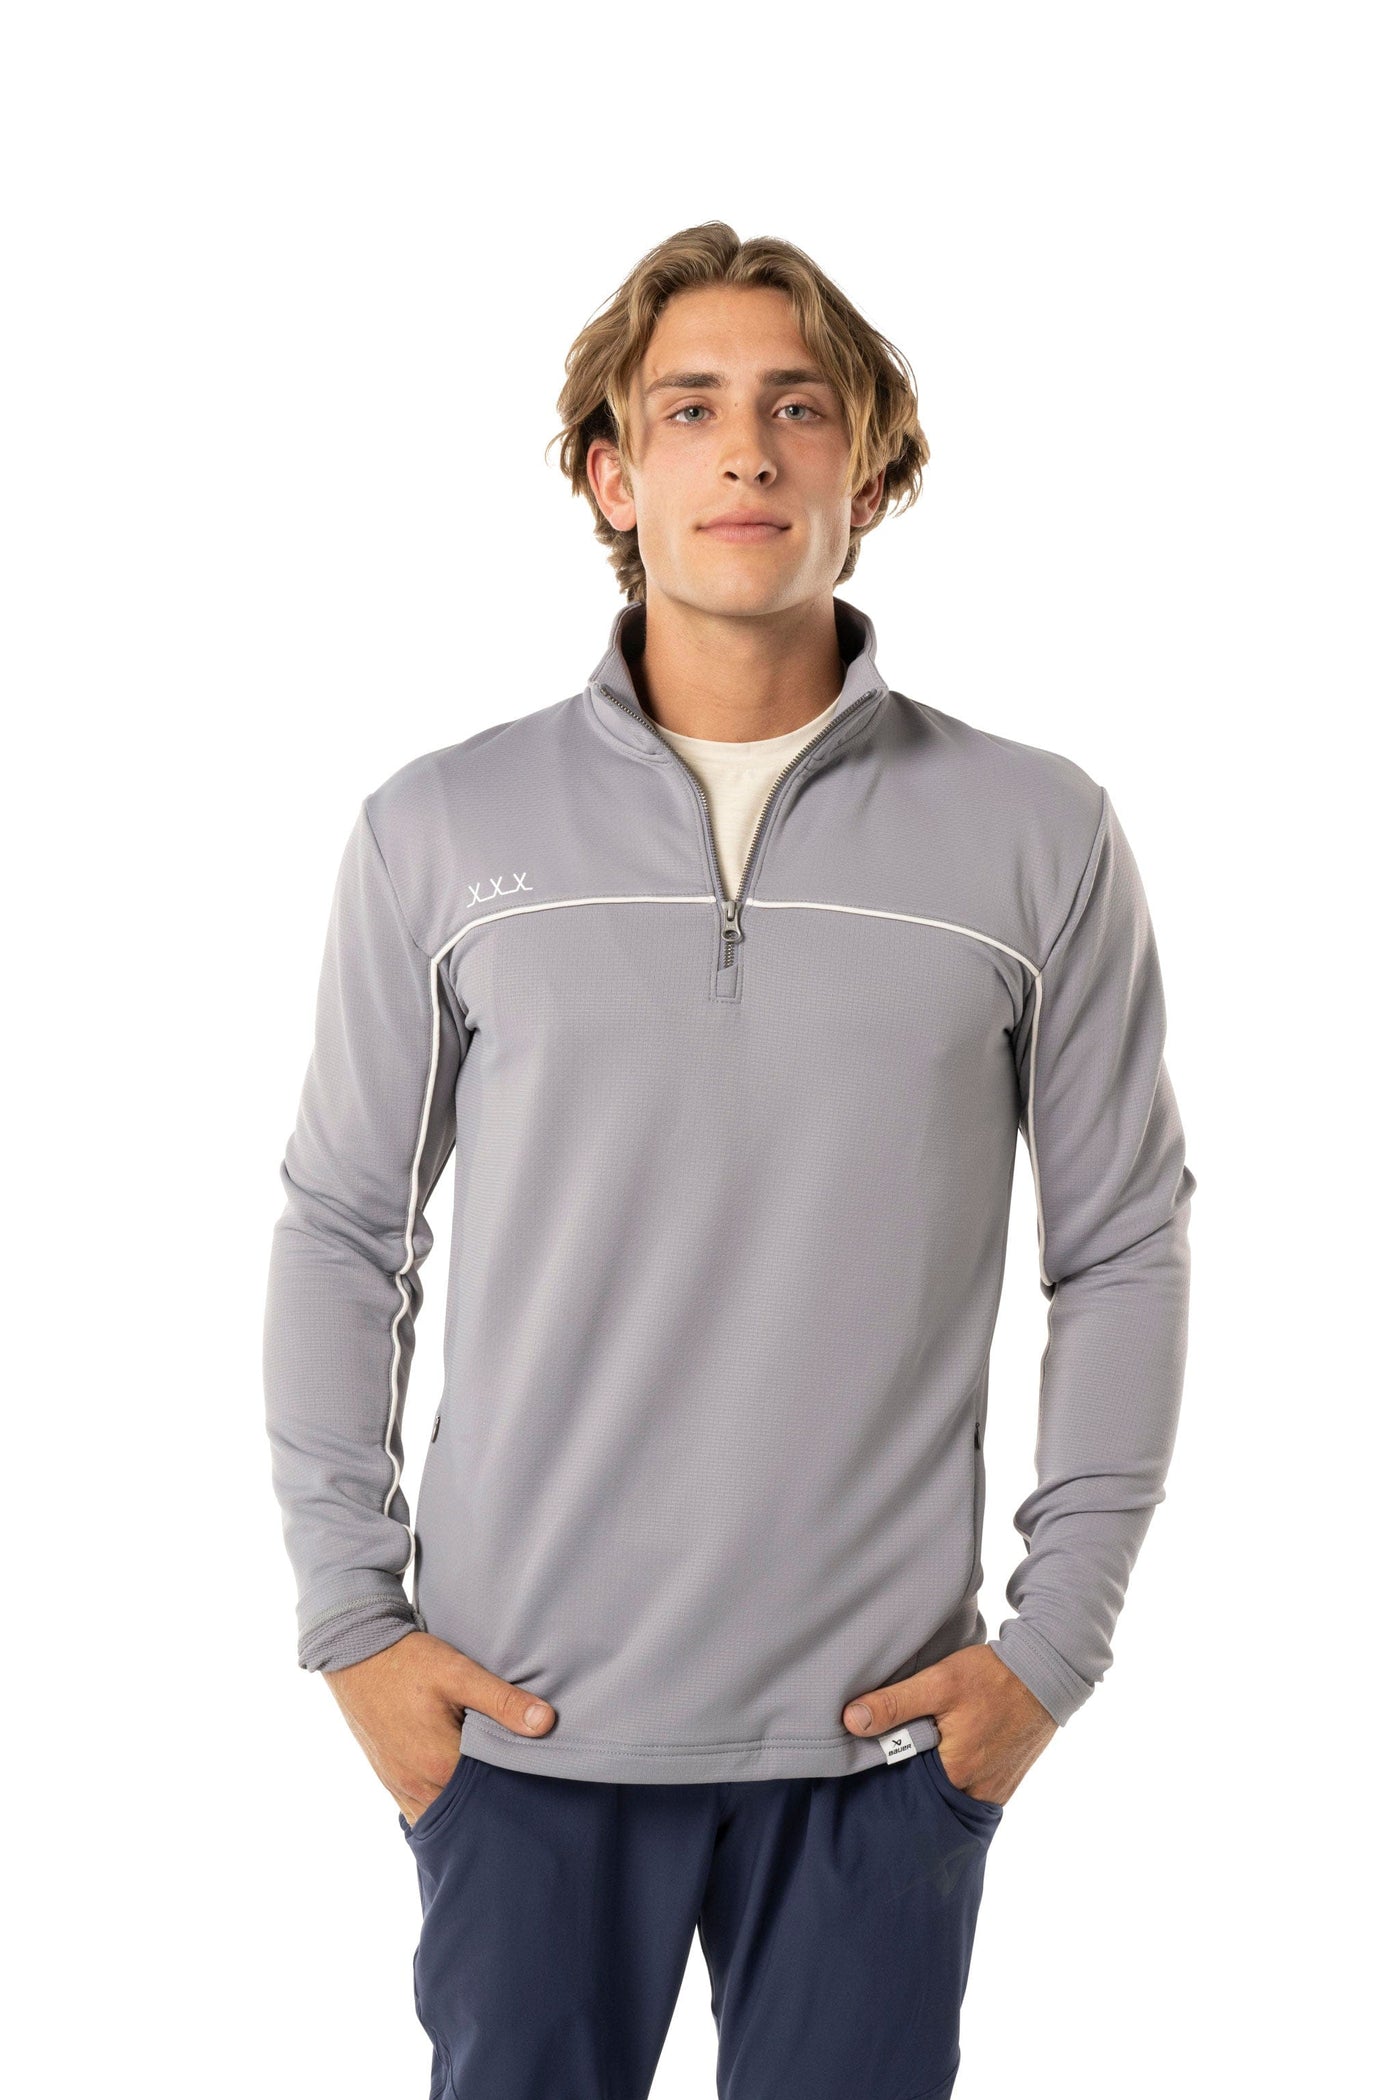 Bauer FLC 1/2 Zip Mens Hoody - Grey - The Hockey Shop Source For Sports